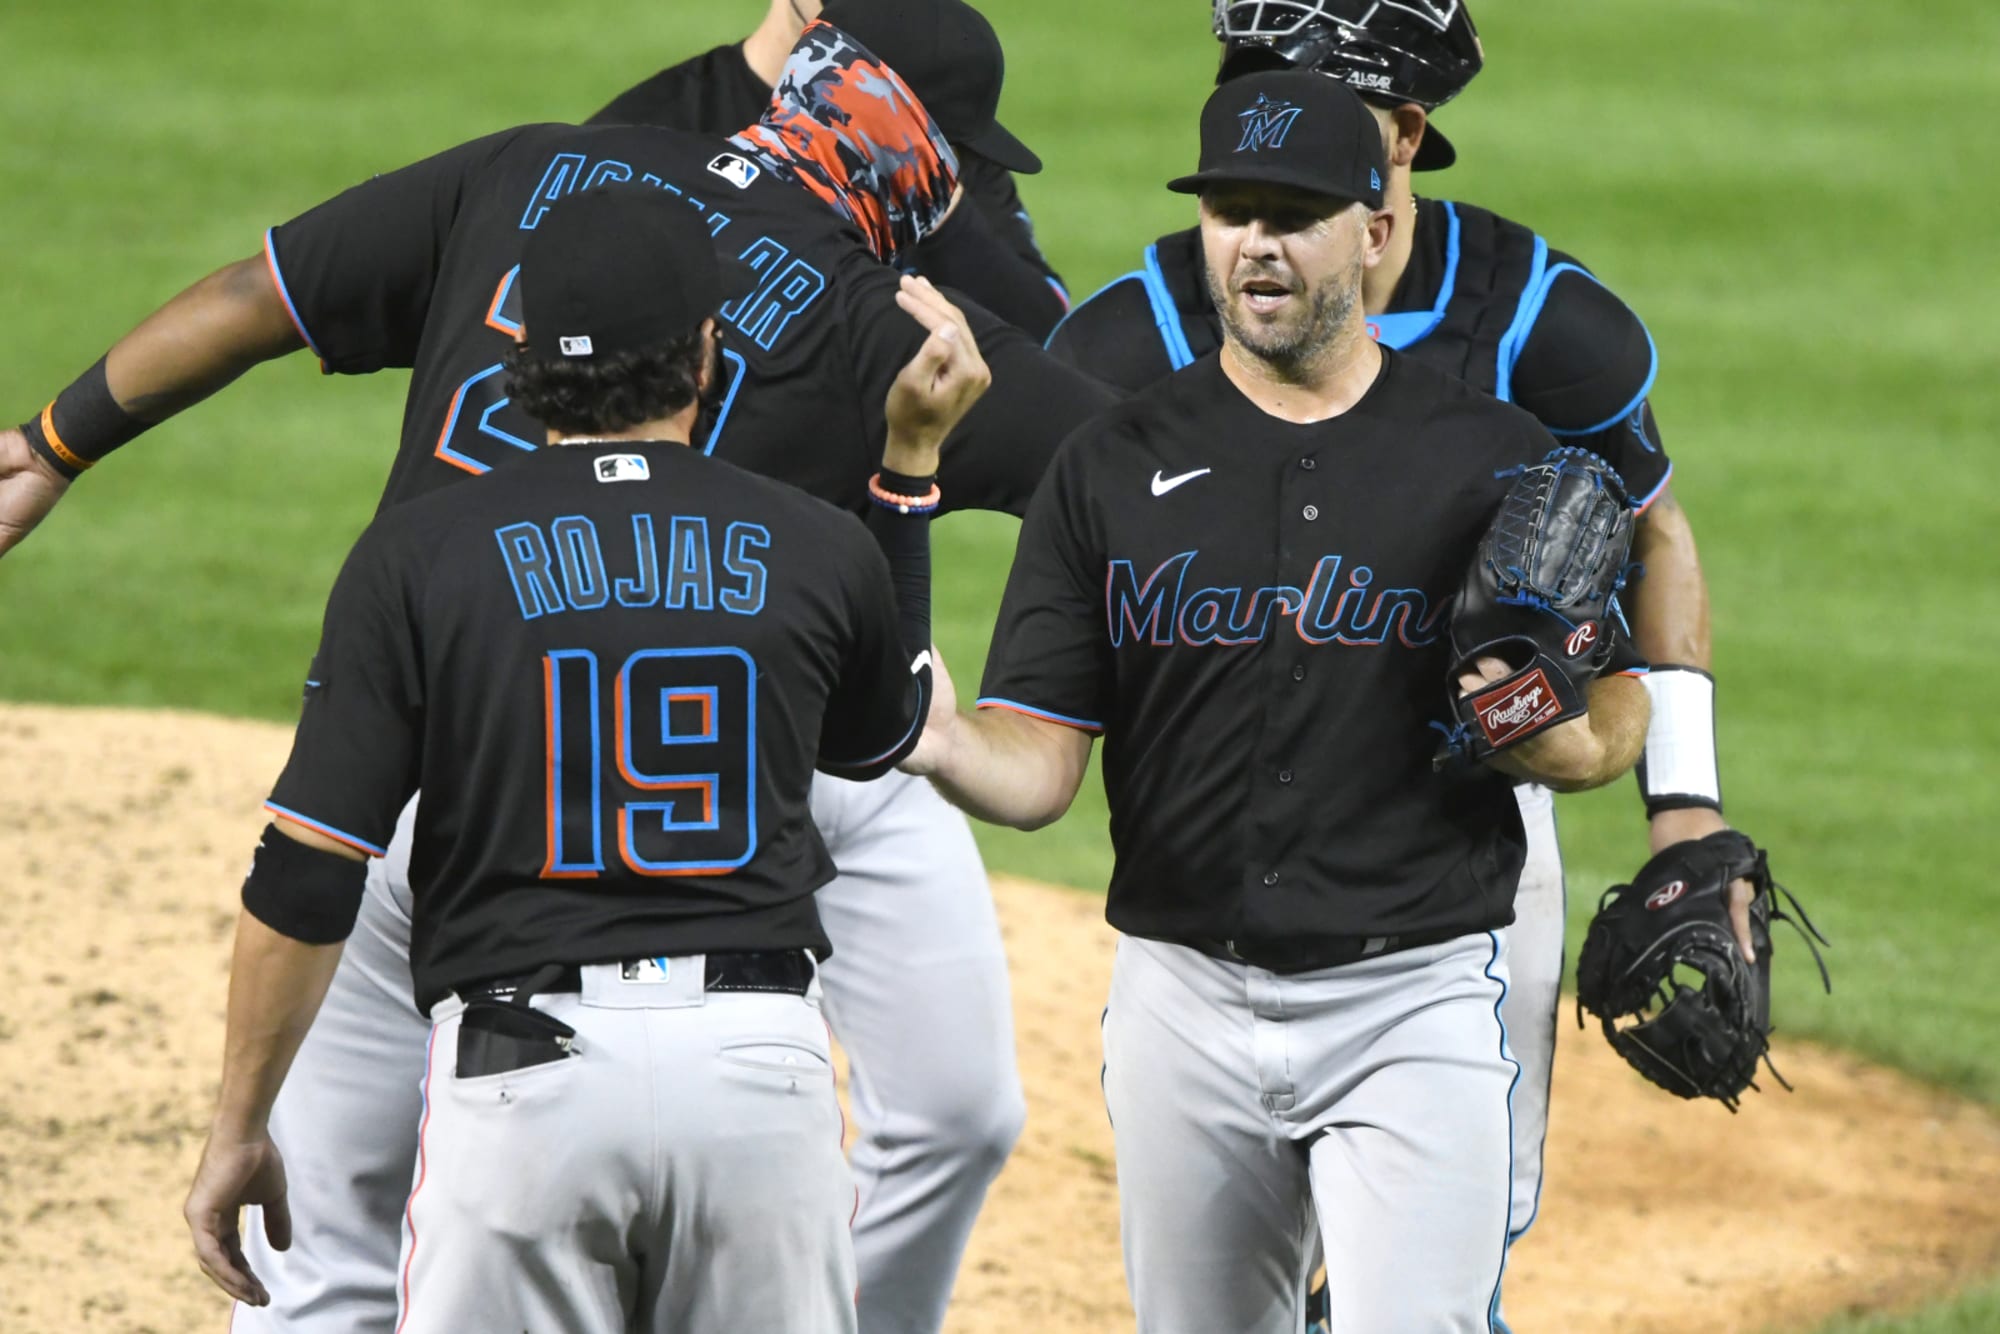 where to buy miami marlins gear